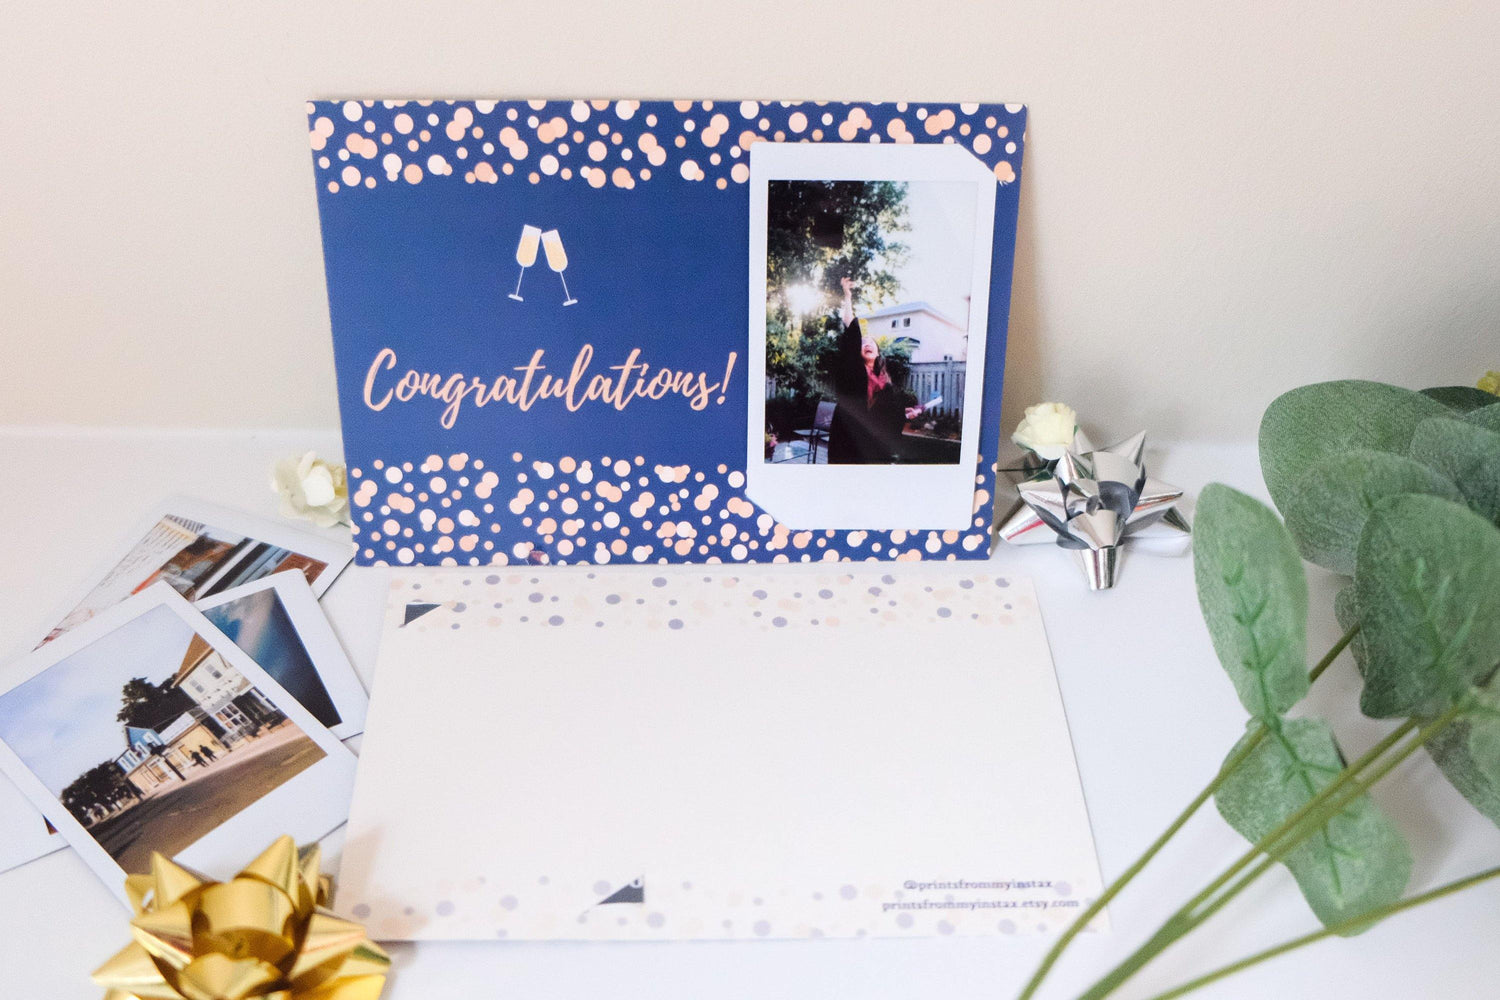 Congratulations Postcard - Prints From My Instax